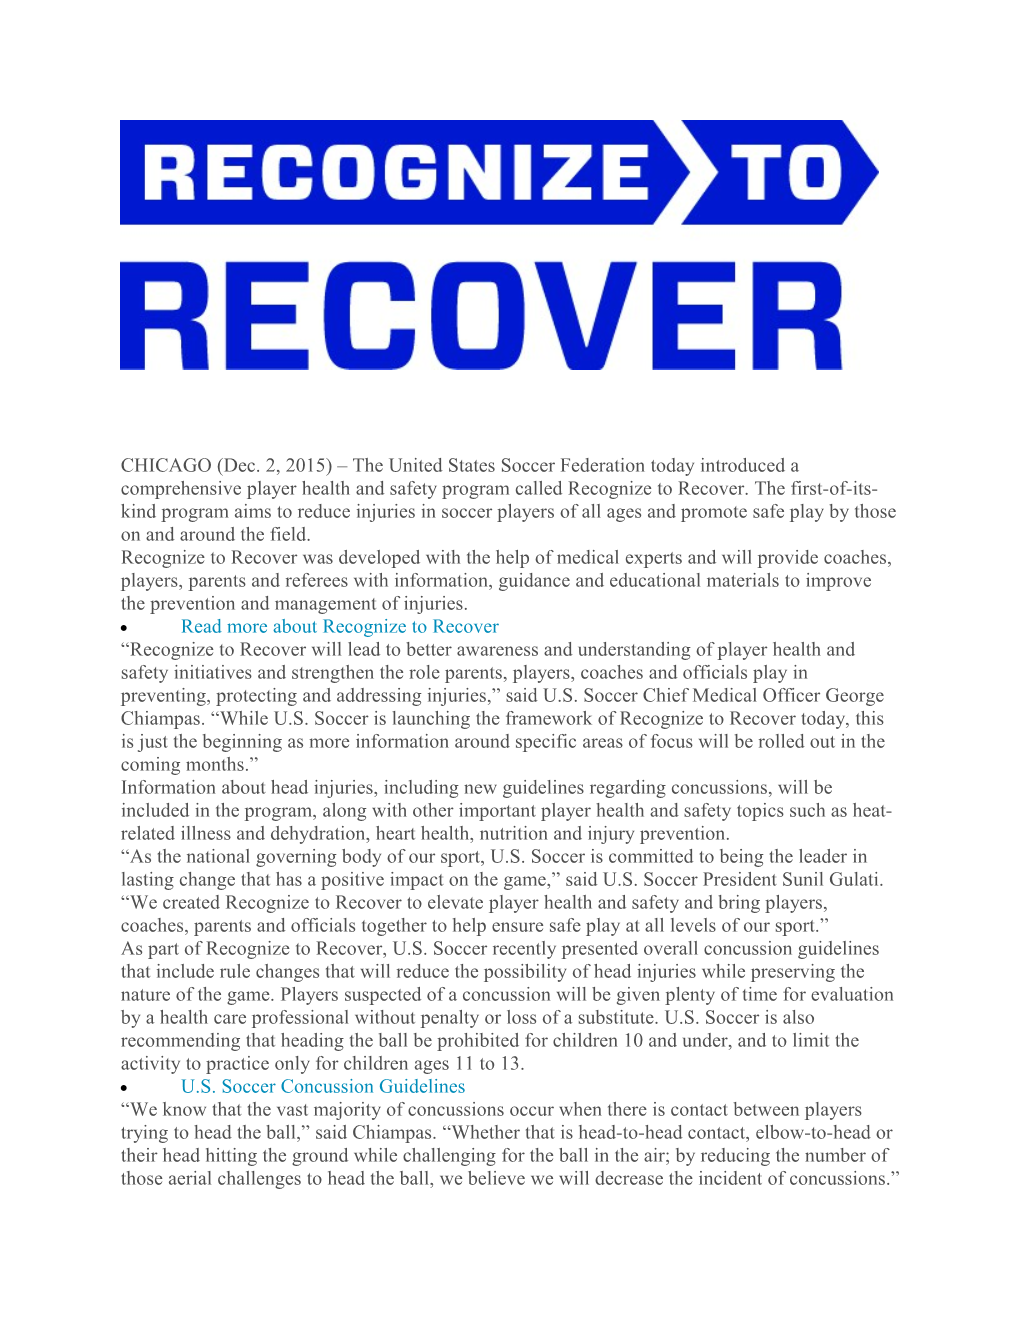 Recognize to Recover Was Developed with the Help of Medical Experts and Will Provide Coaches